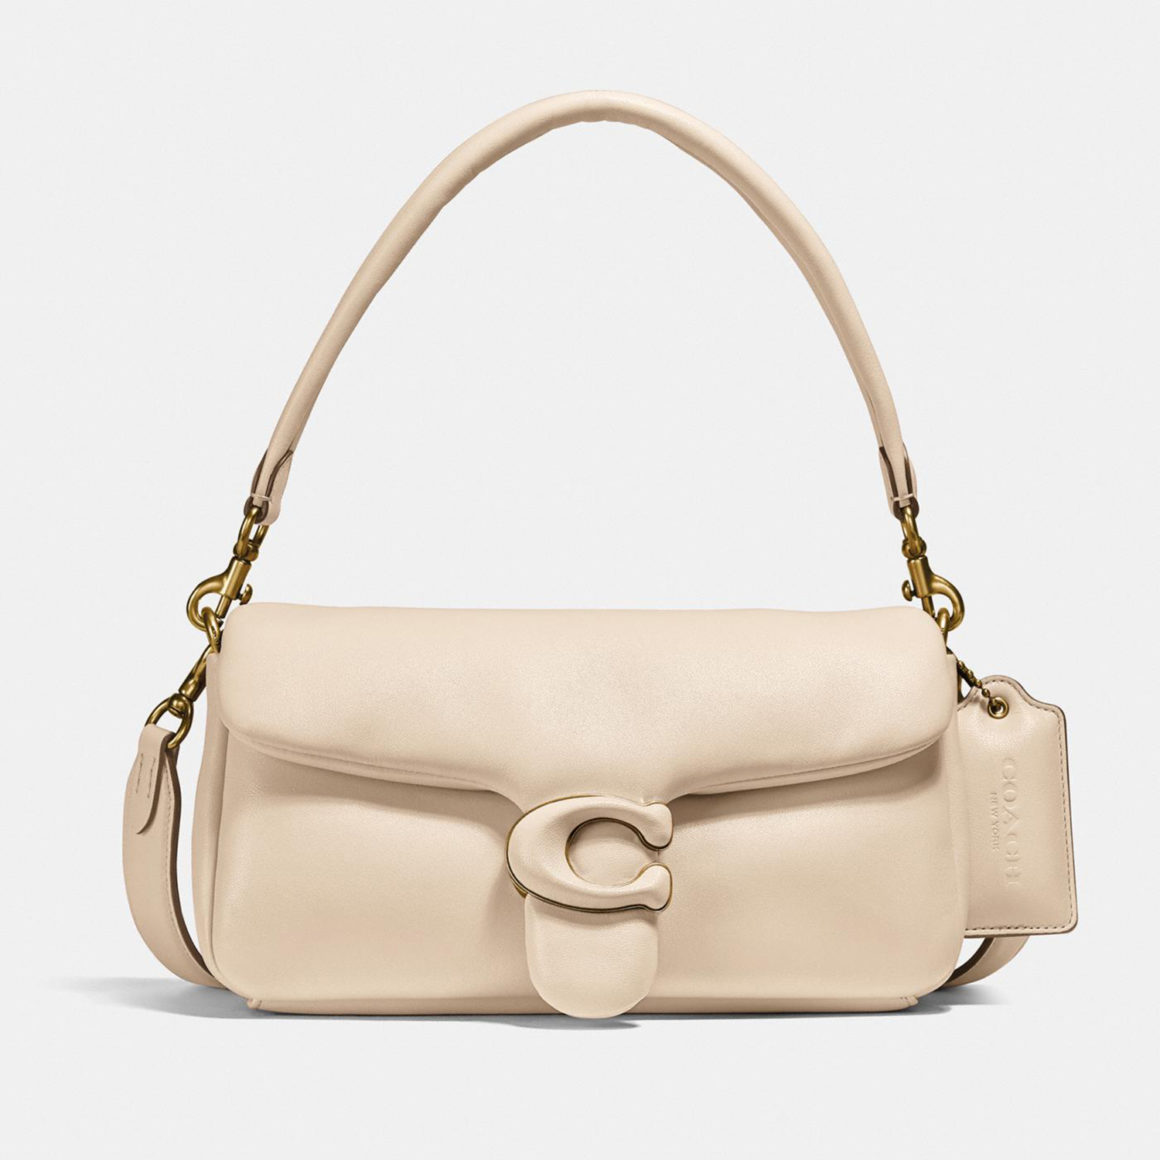 Bomb Accessories: Coach ‘Tabby’ Pillow Bag – Fashion Bomb Daily